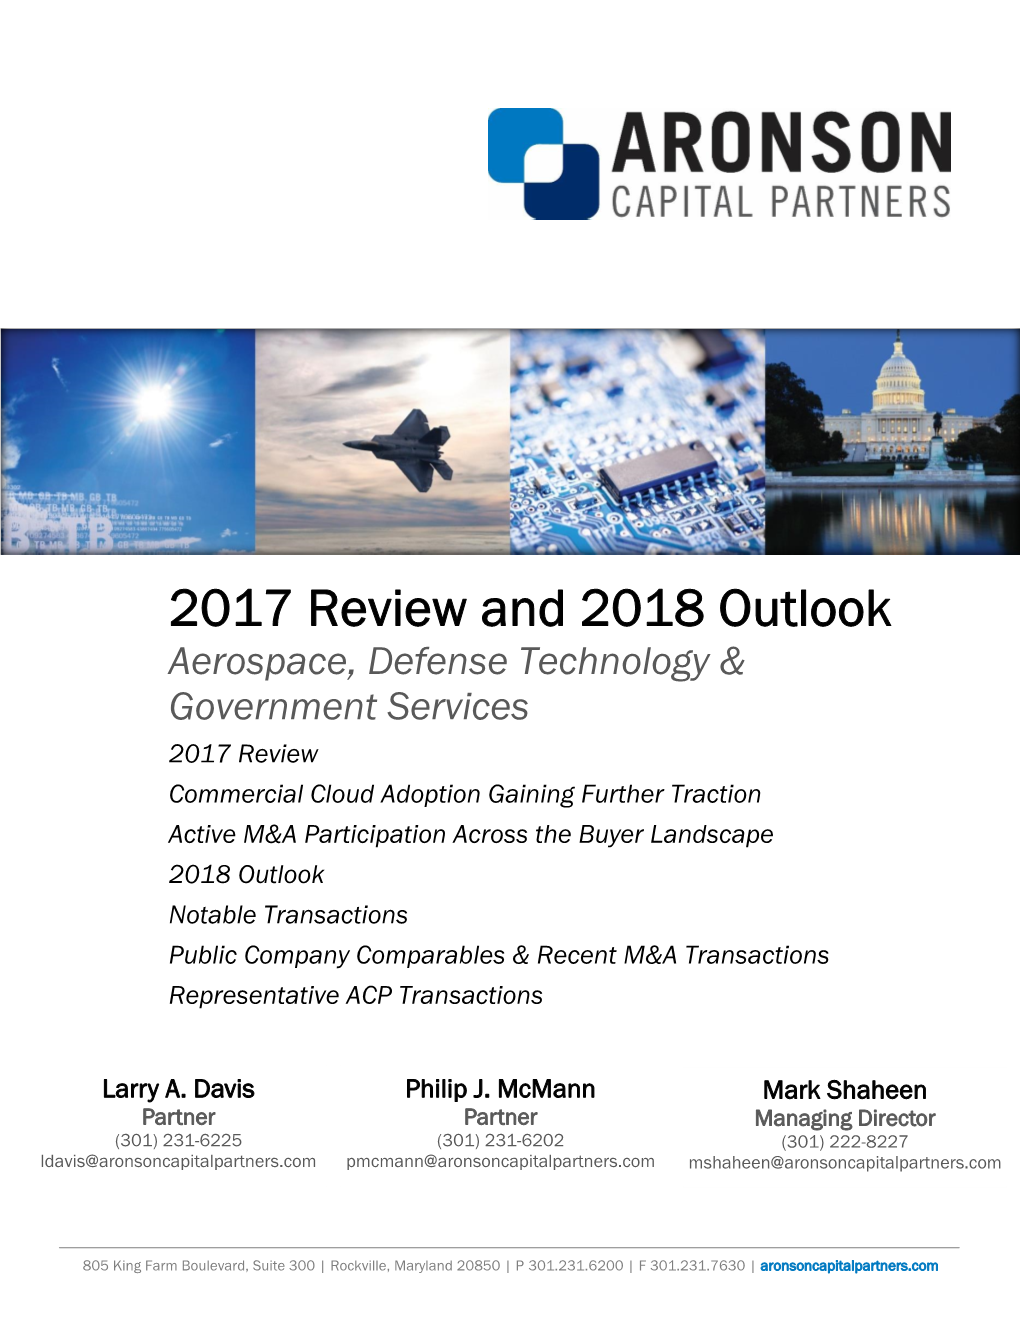 2017 Review and 2018 Outlook